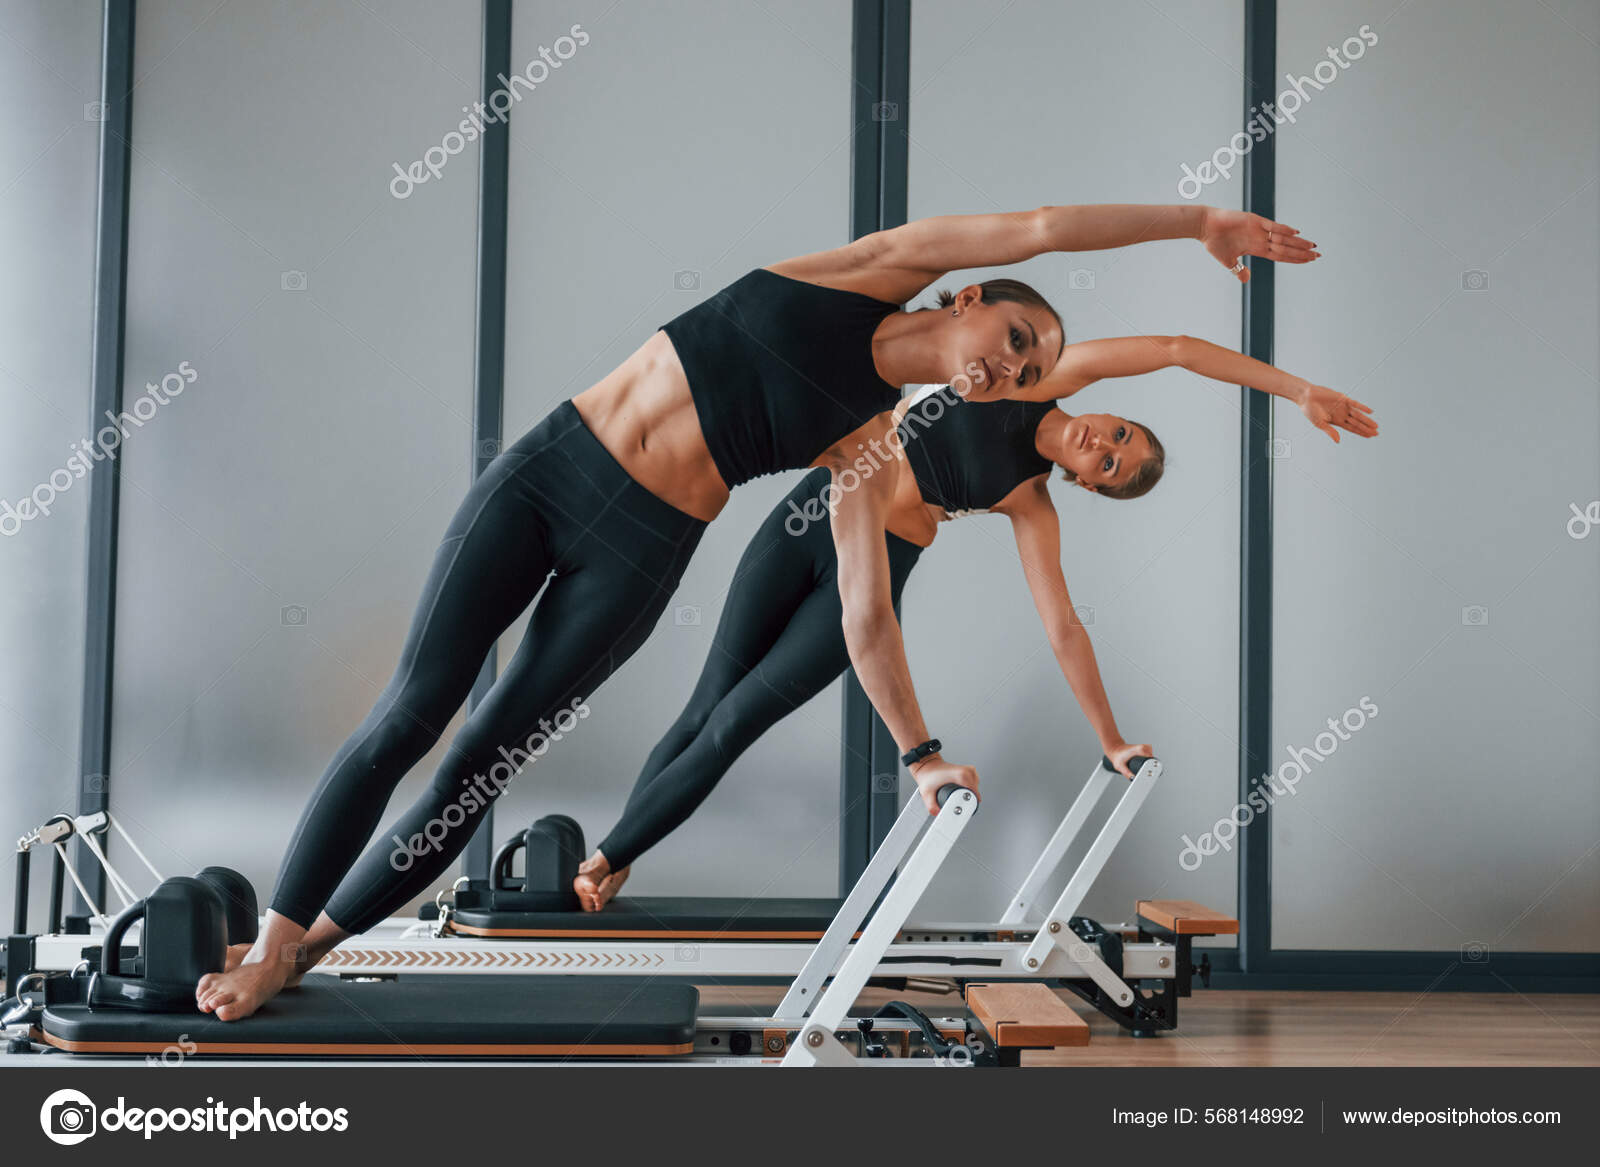 Premium Photo  Standing on gym equipment and doing stretches two